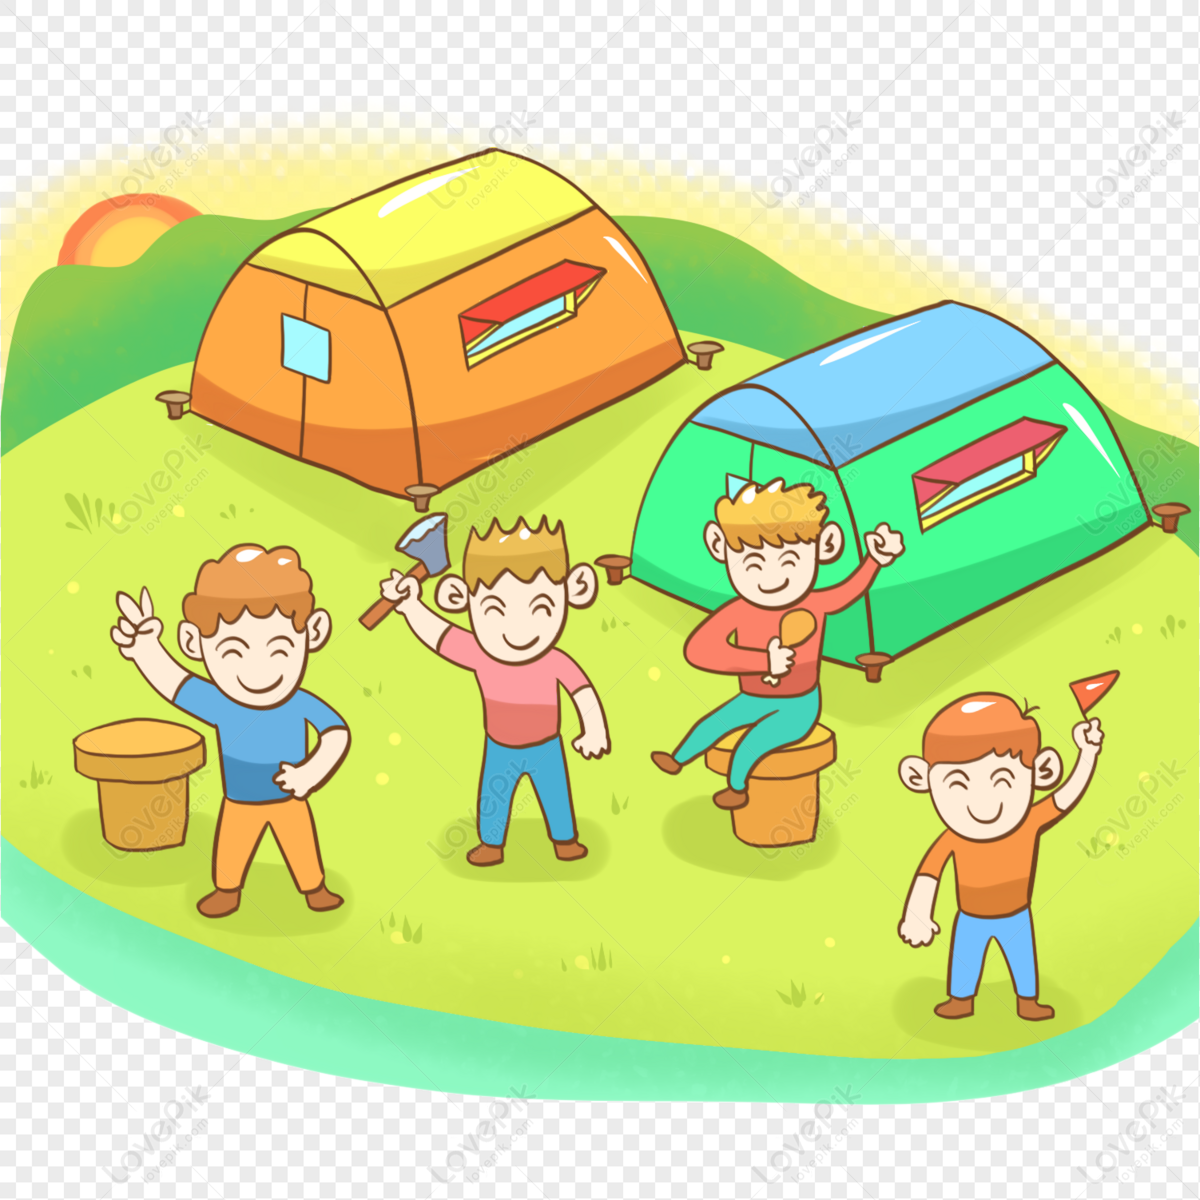 Outdoor Adventure Camp PNG Hd Transparent Image And Clipart Image For Free  Download - Lovepik | 401497554